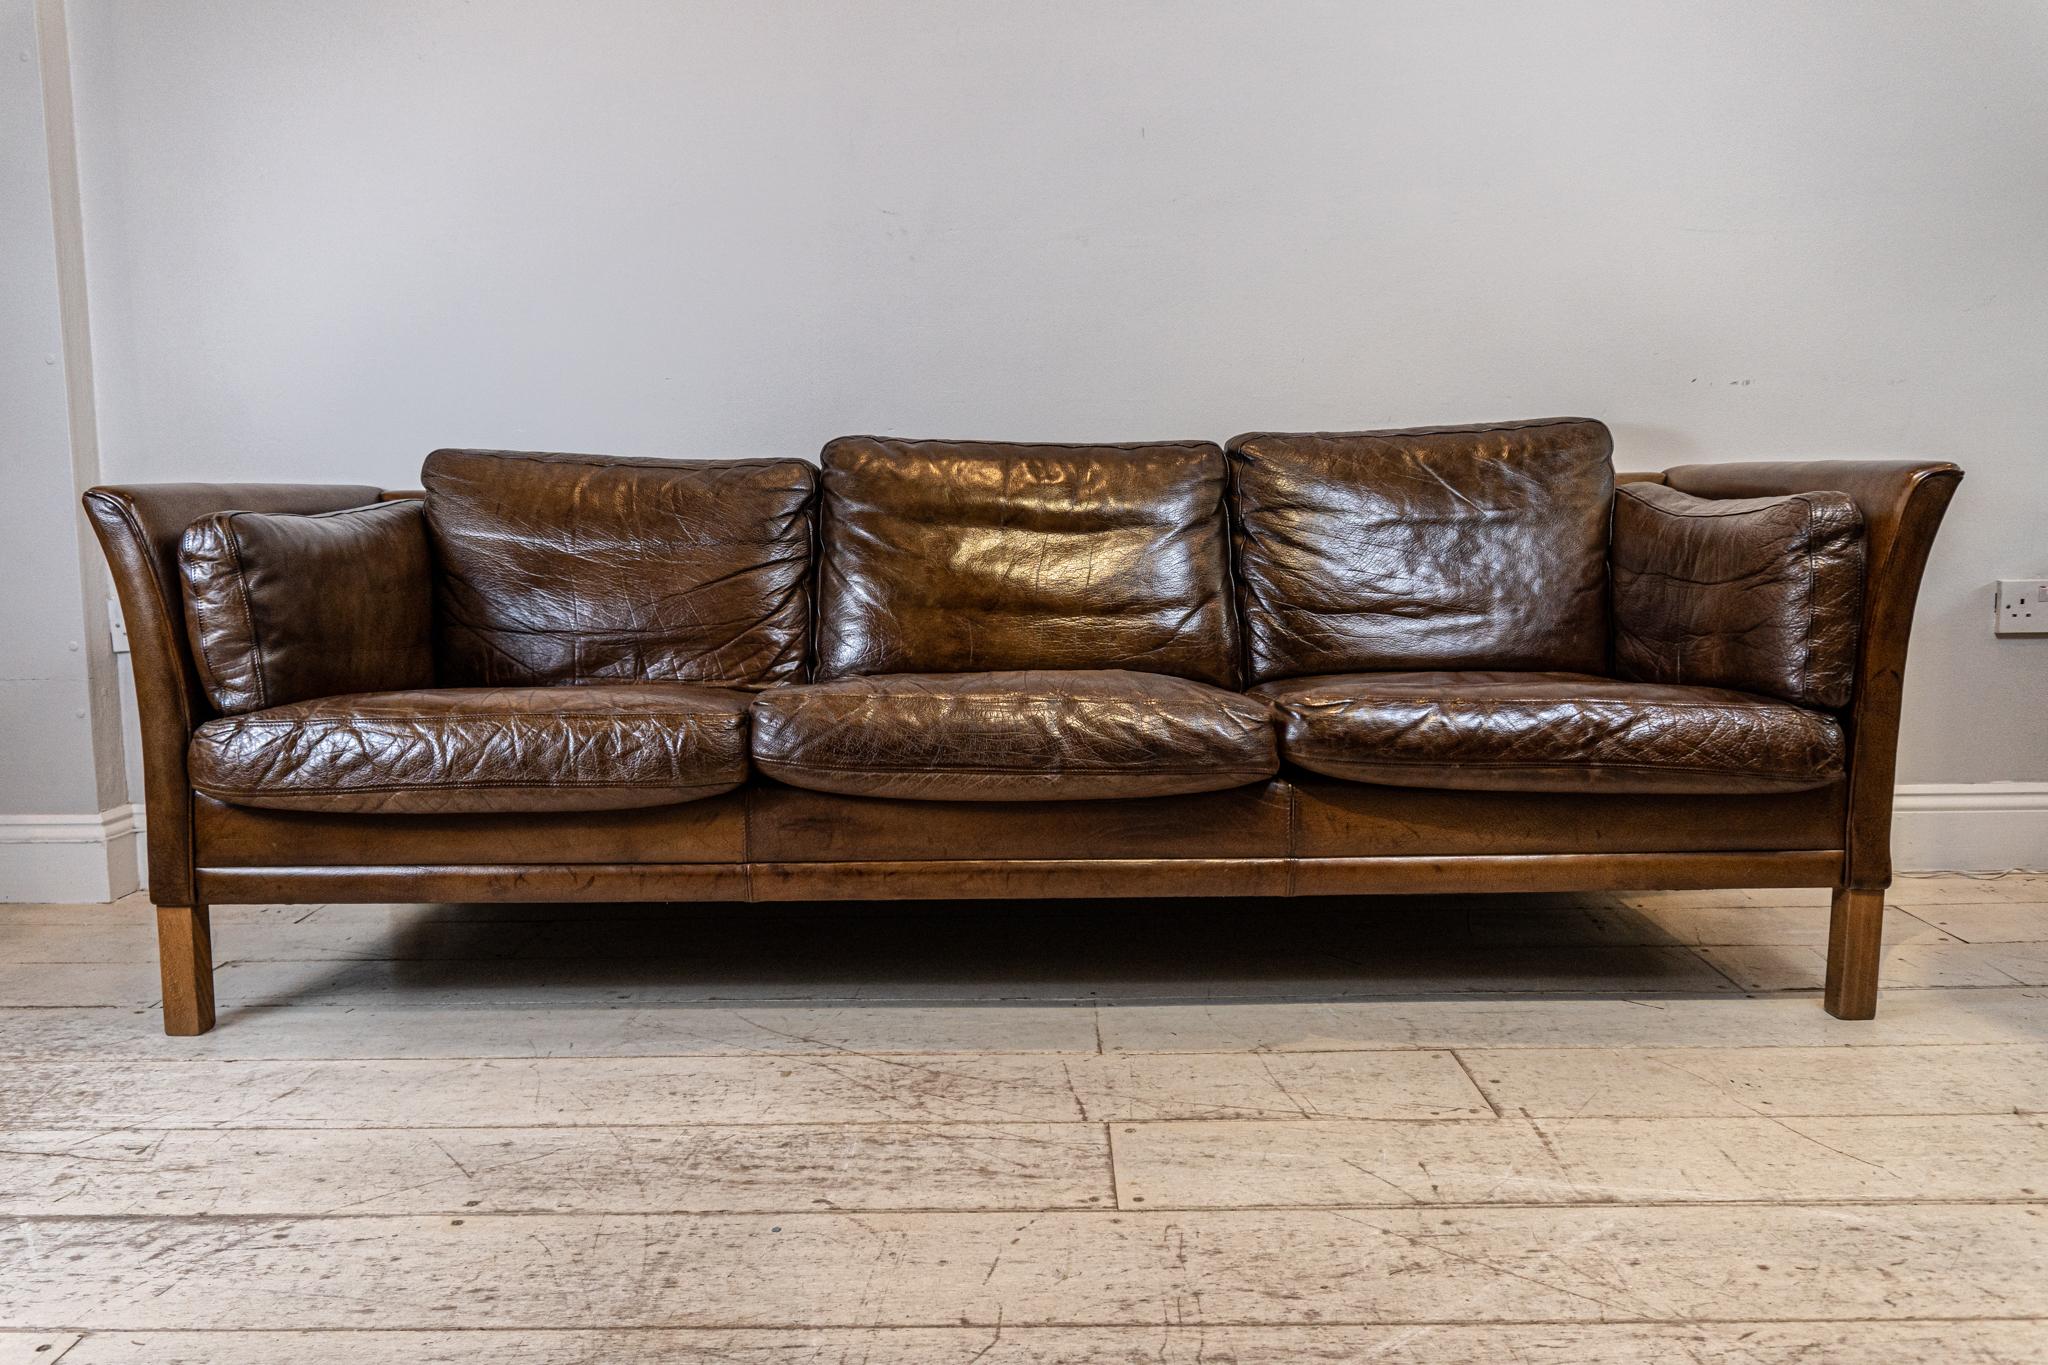 A well sized Mid-Century Modern 1960s Børge Mogensen leather three seater sofa or couch. The leather is of a very good quality with a rich dark brown patina. The legs are made from Walnut. 

This large Scandinavian Classic designed sofa would add